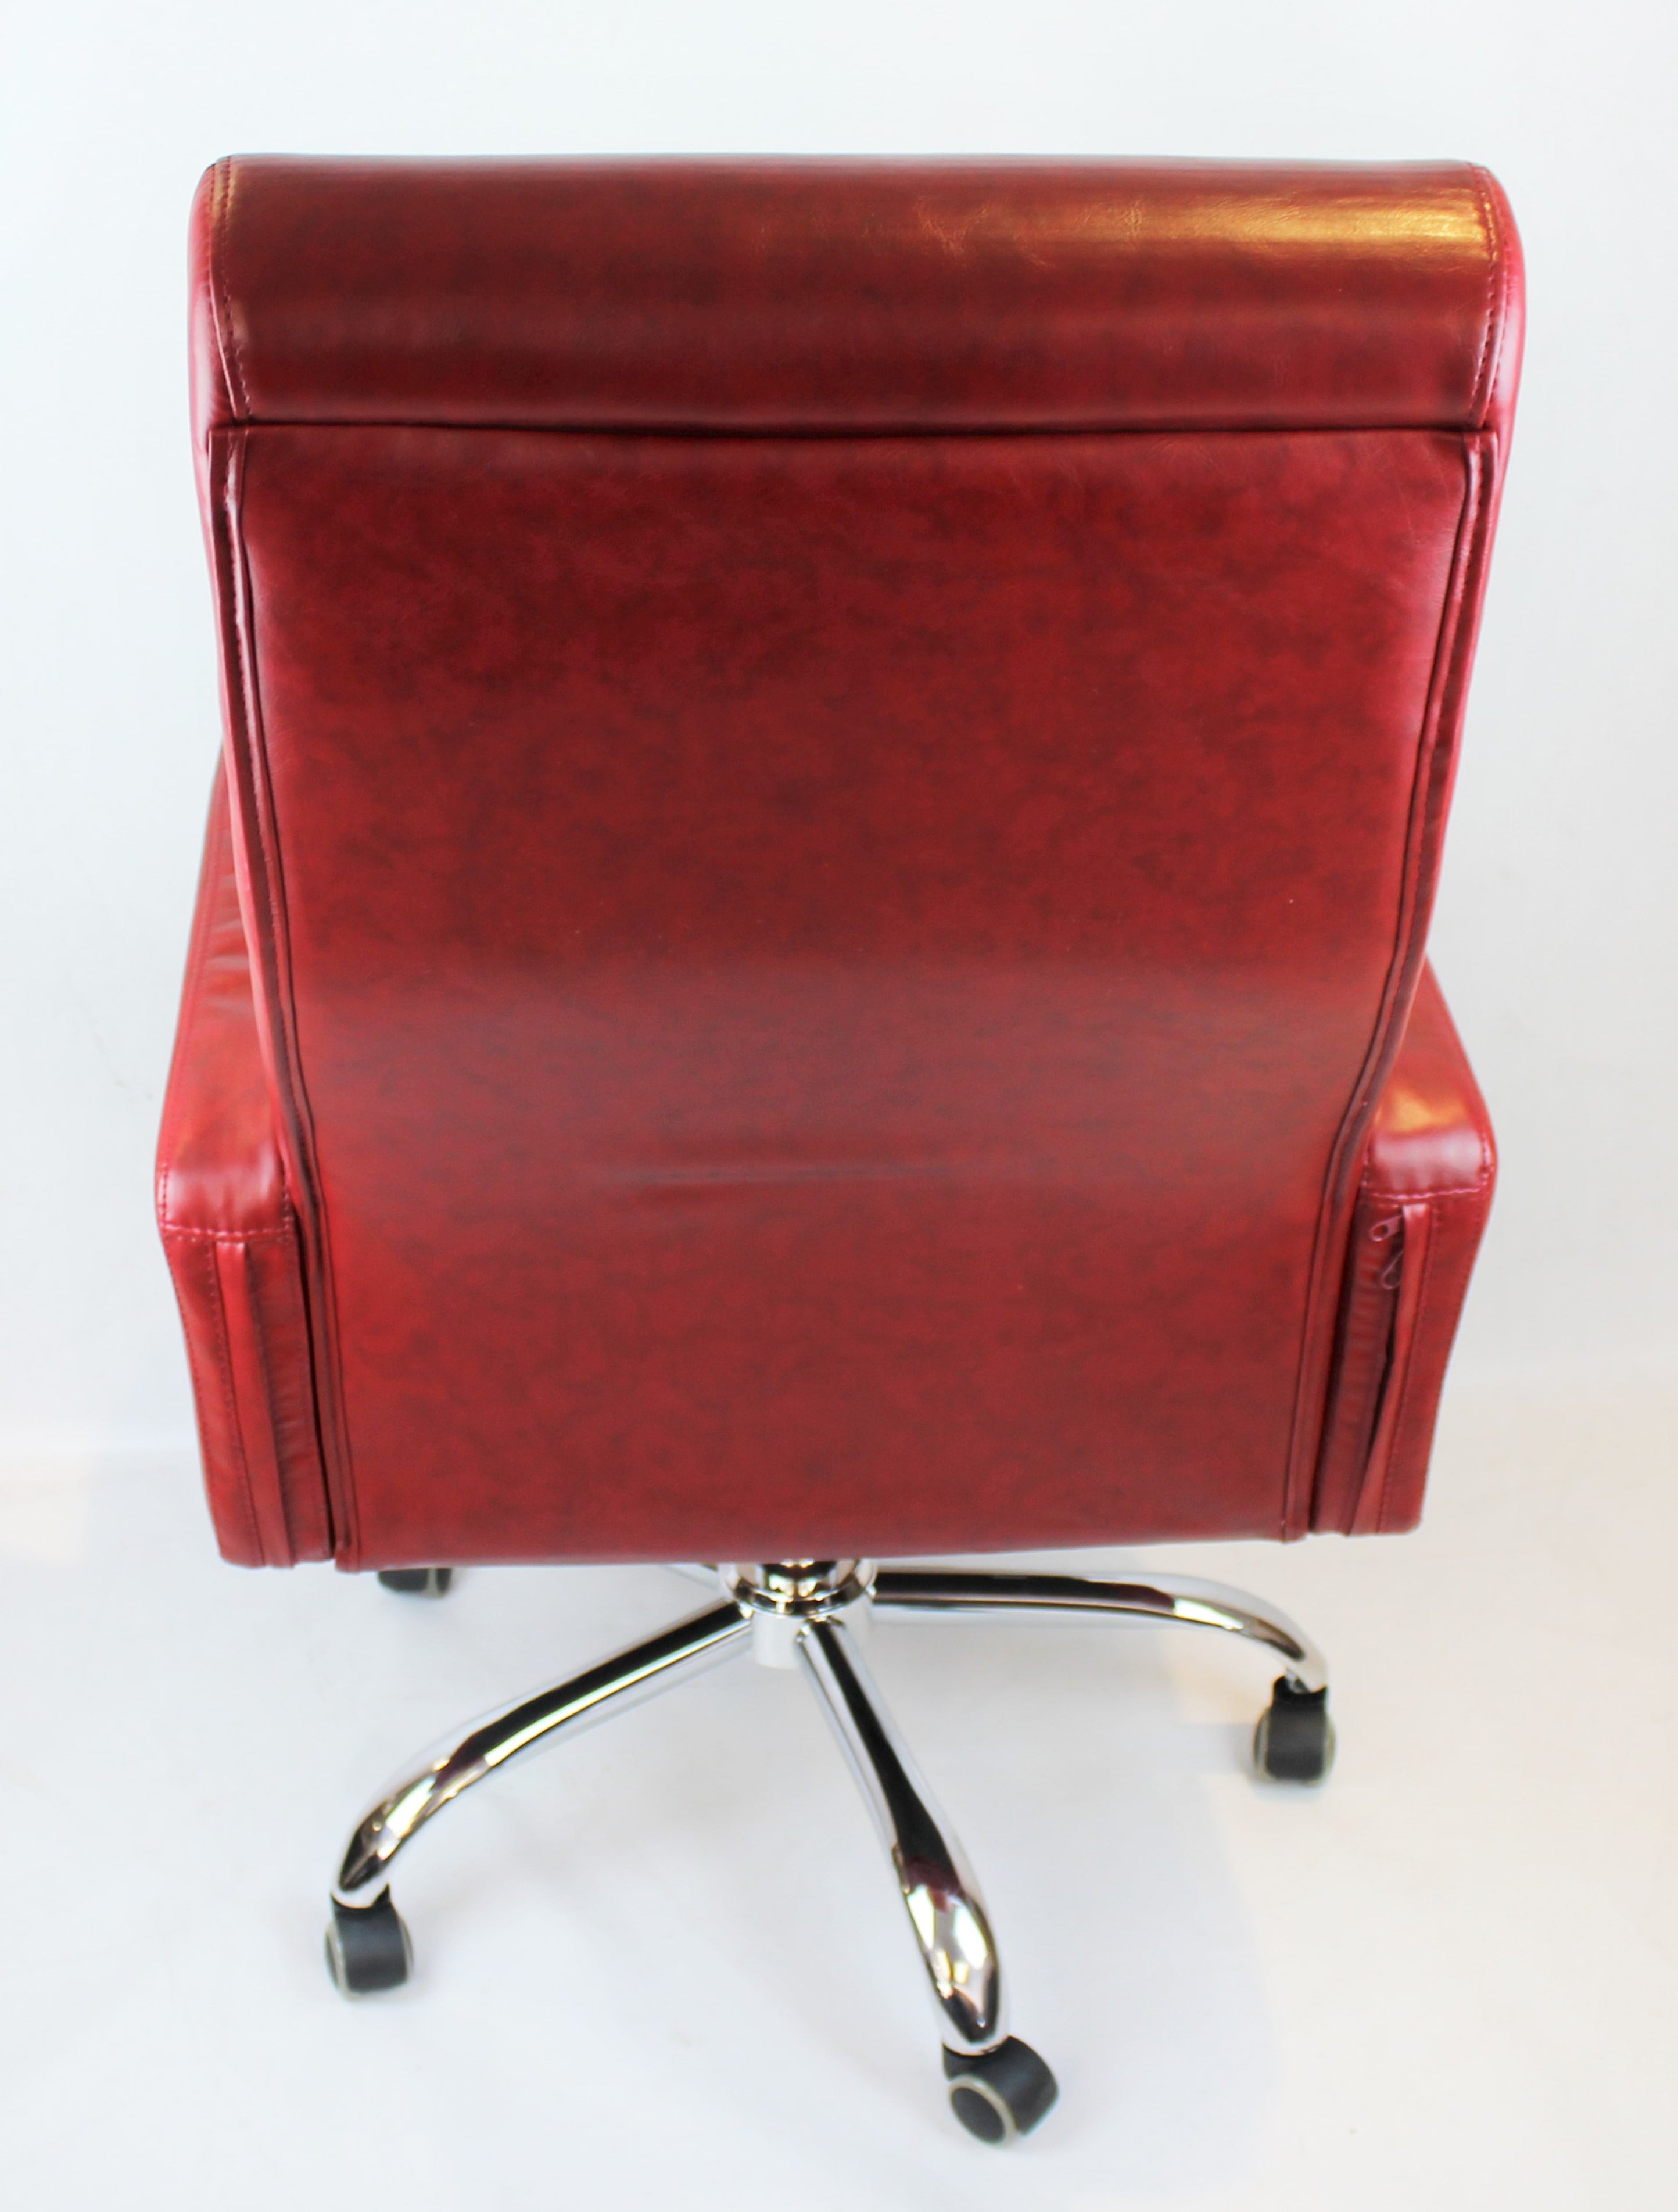 Modern Red Leather Executive Office Chair - DH-009